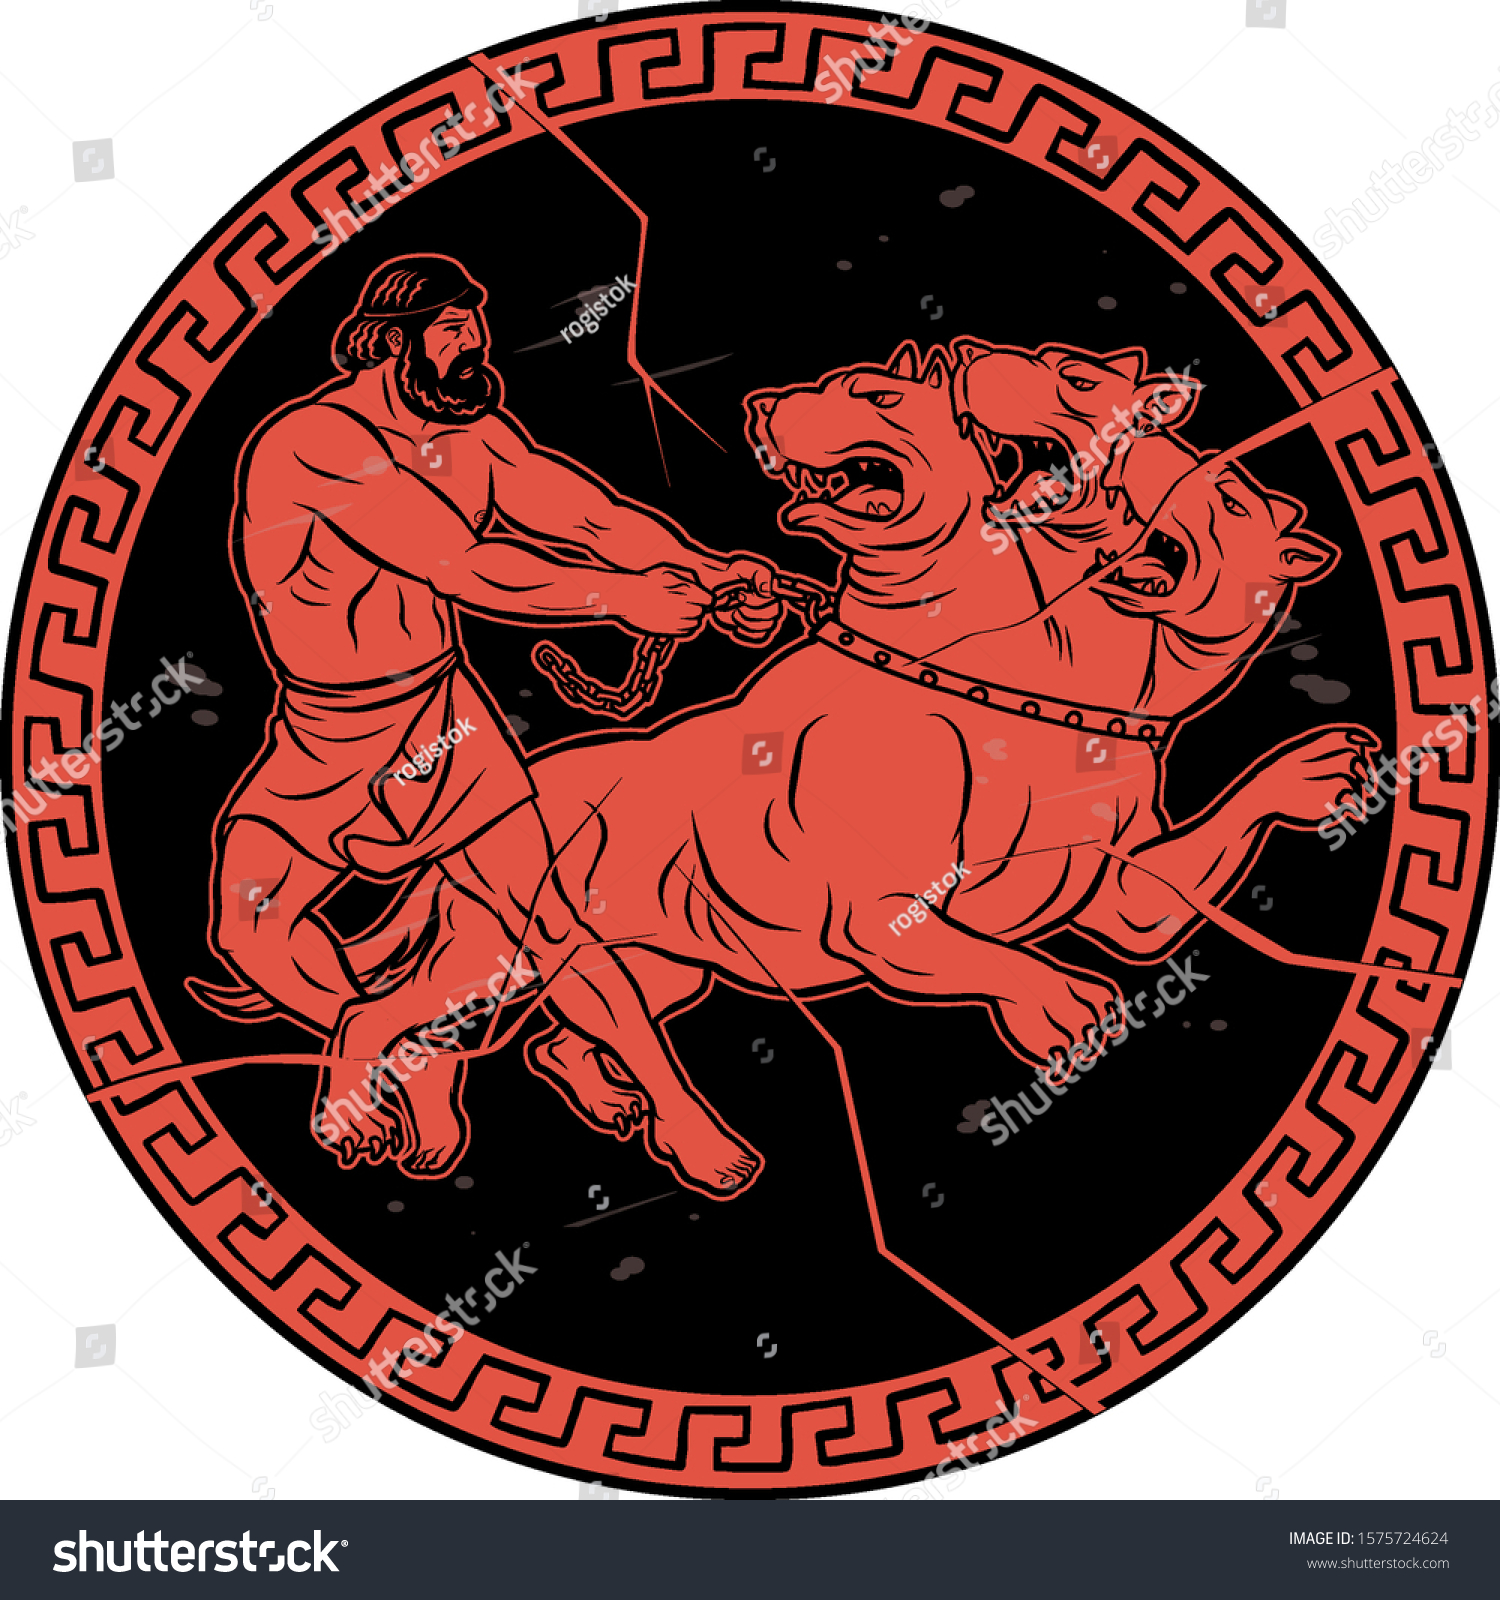 SVG of Capture and bring back Cerberus. 12 Labours of Hercules Heracles. Myths Of Ancient Greece illustration svg